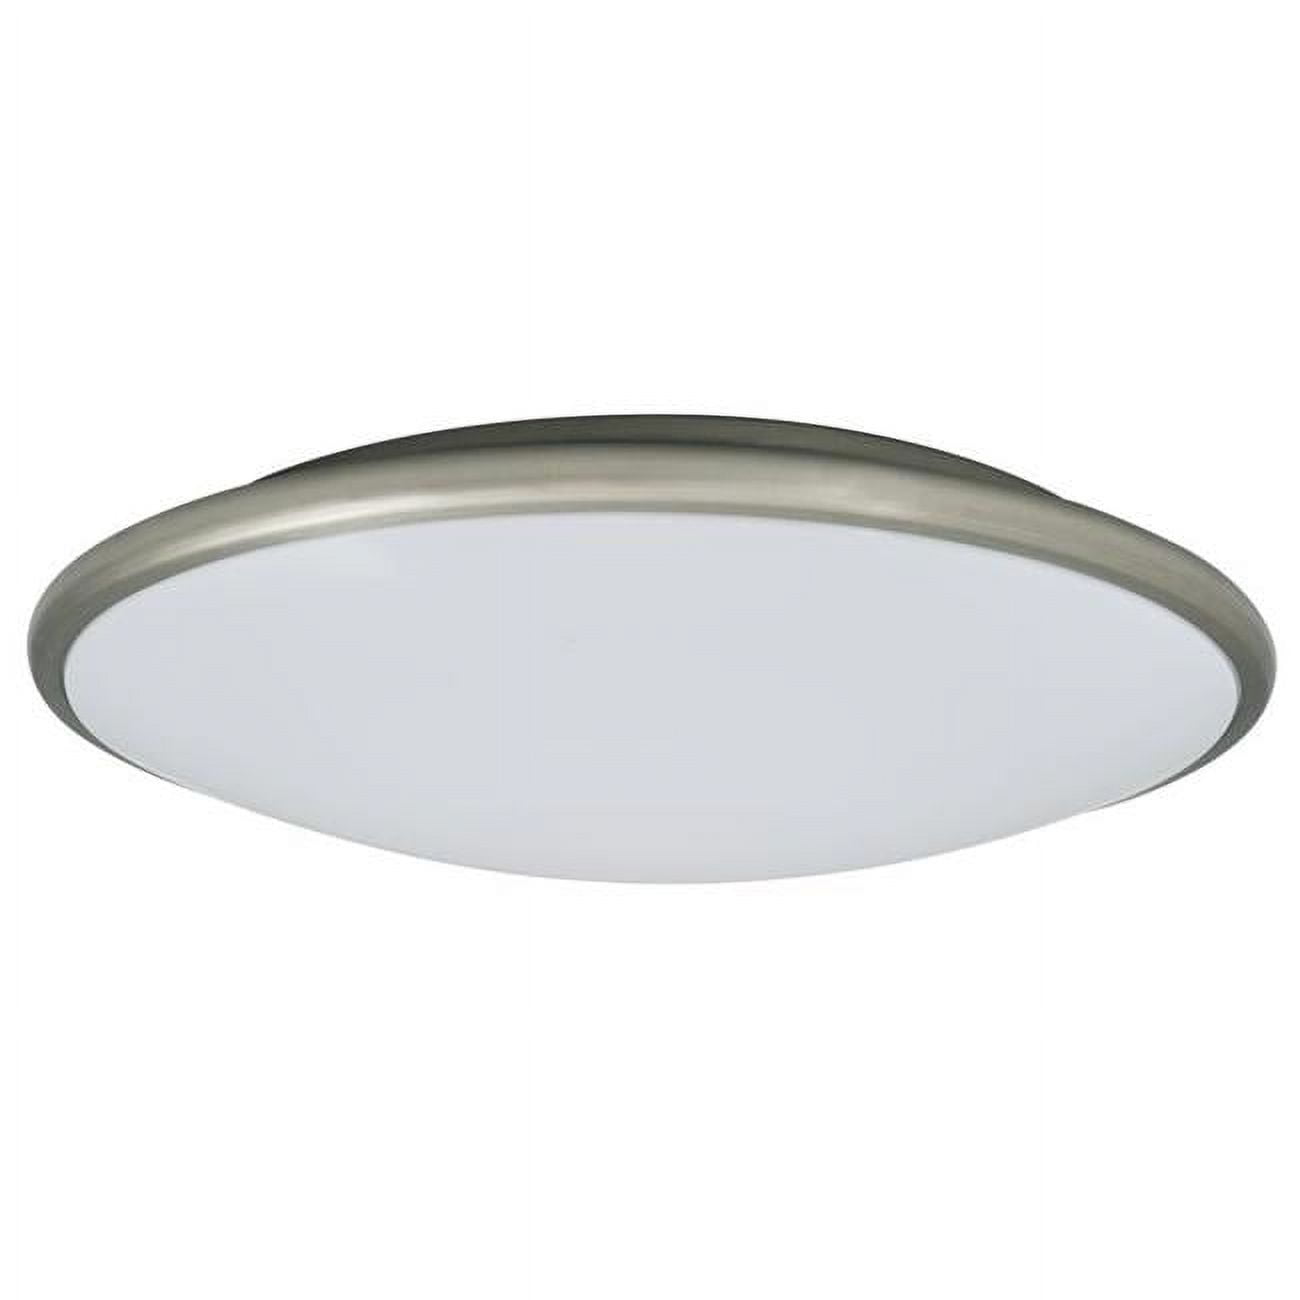 Led-m001lnkl 13 X 3.5 In. Led Ceiling Fixture Saucer - Nickel